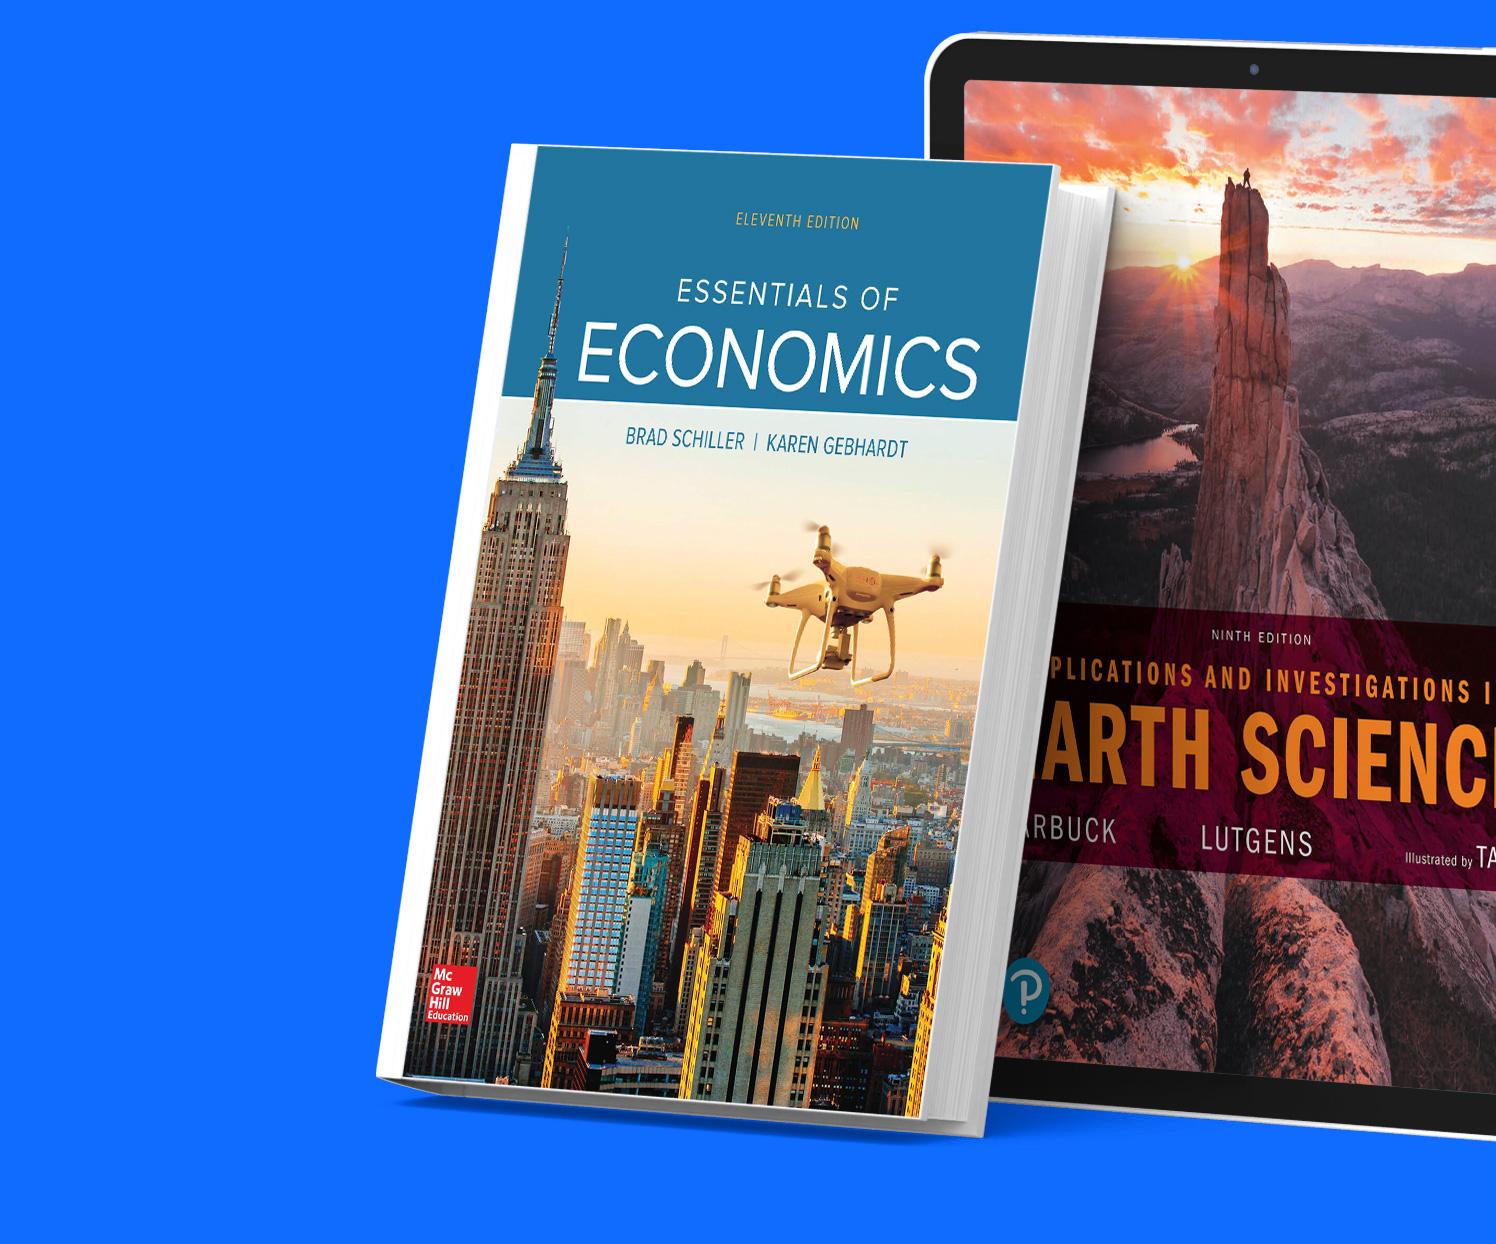 Two books are shown, one on economics titled as "Essentials of Economics" and another on Earth Science